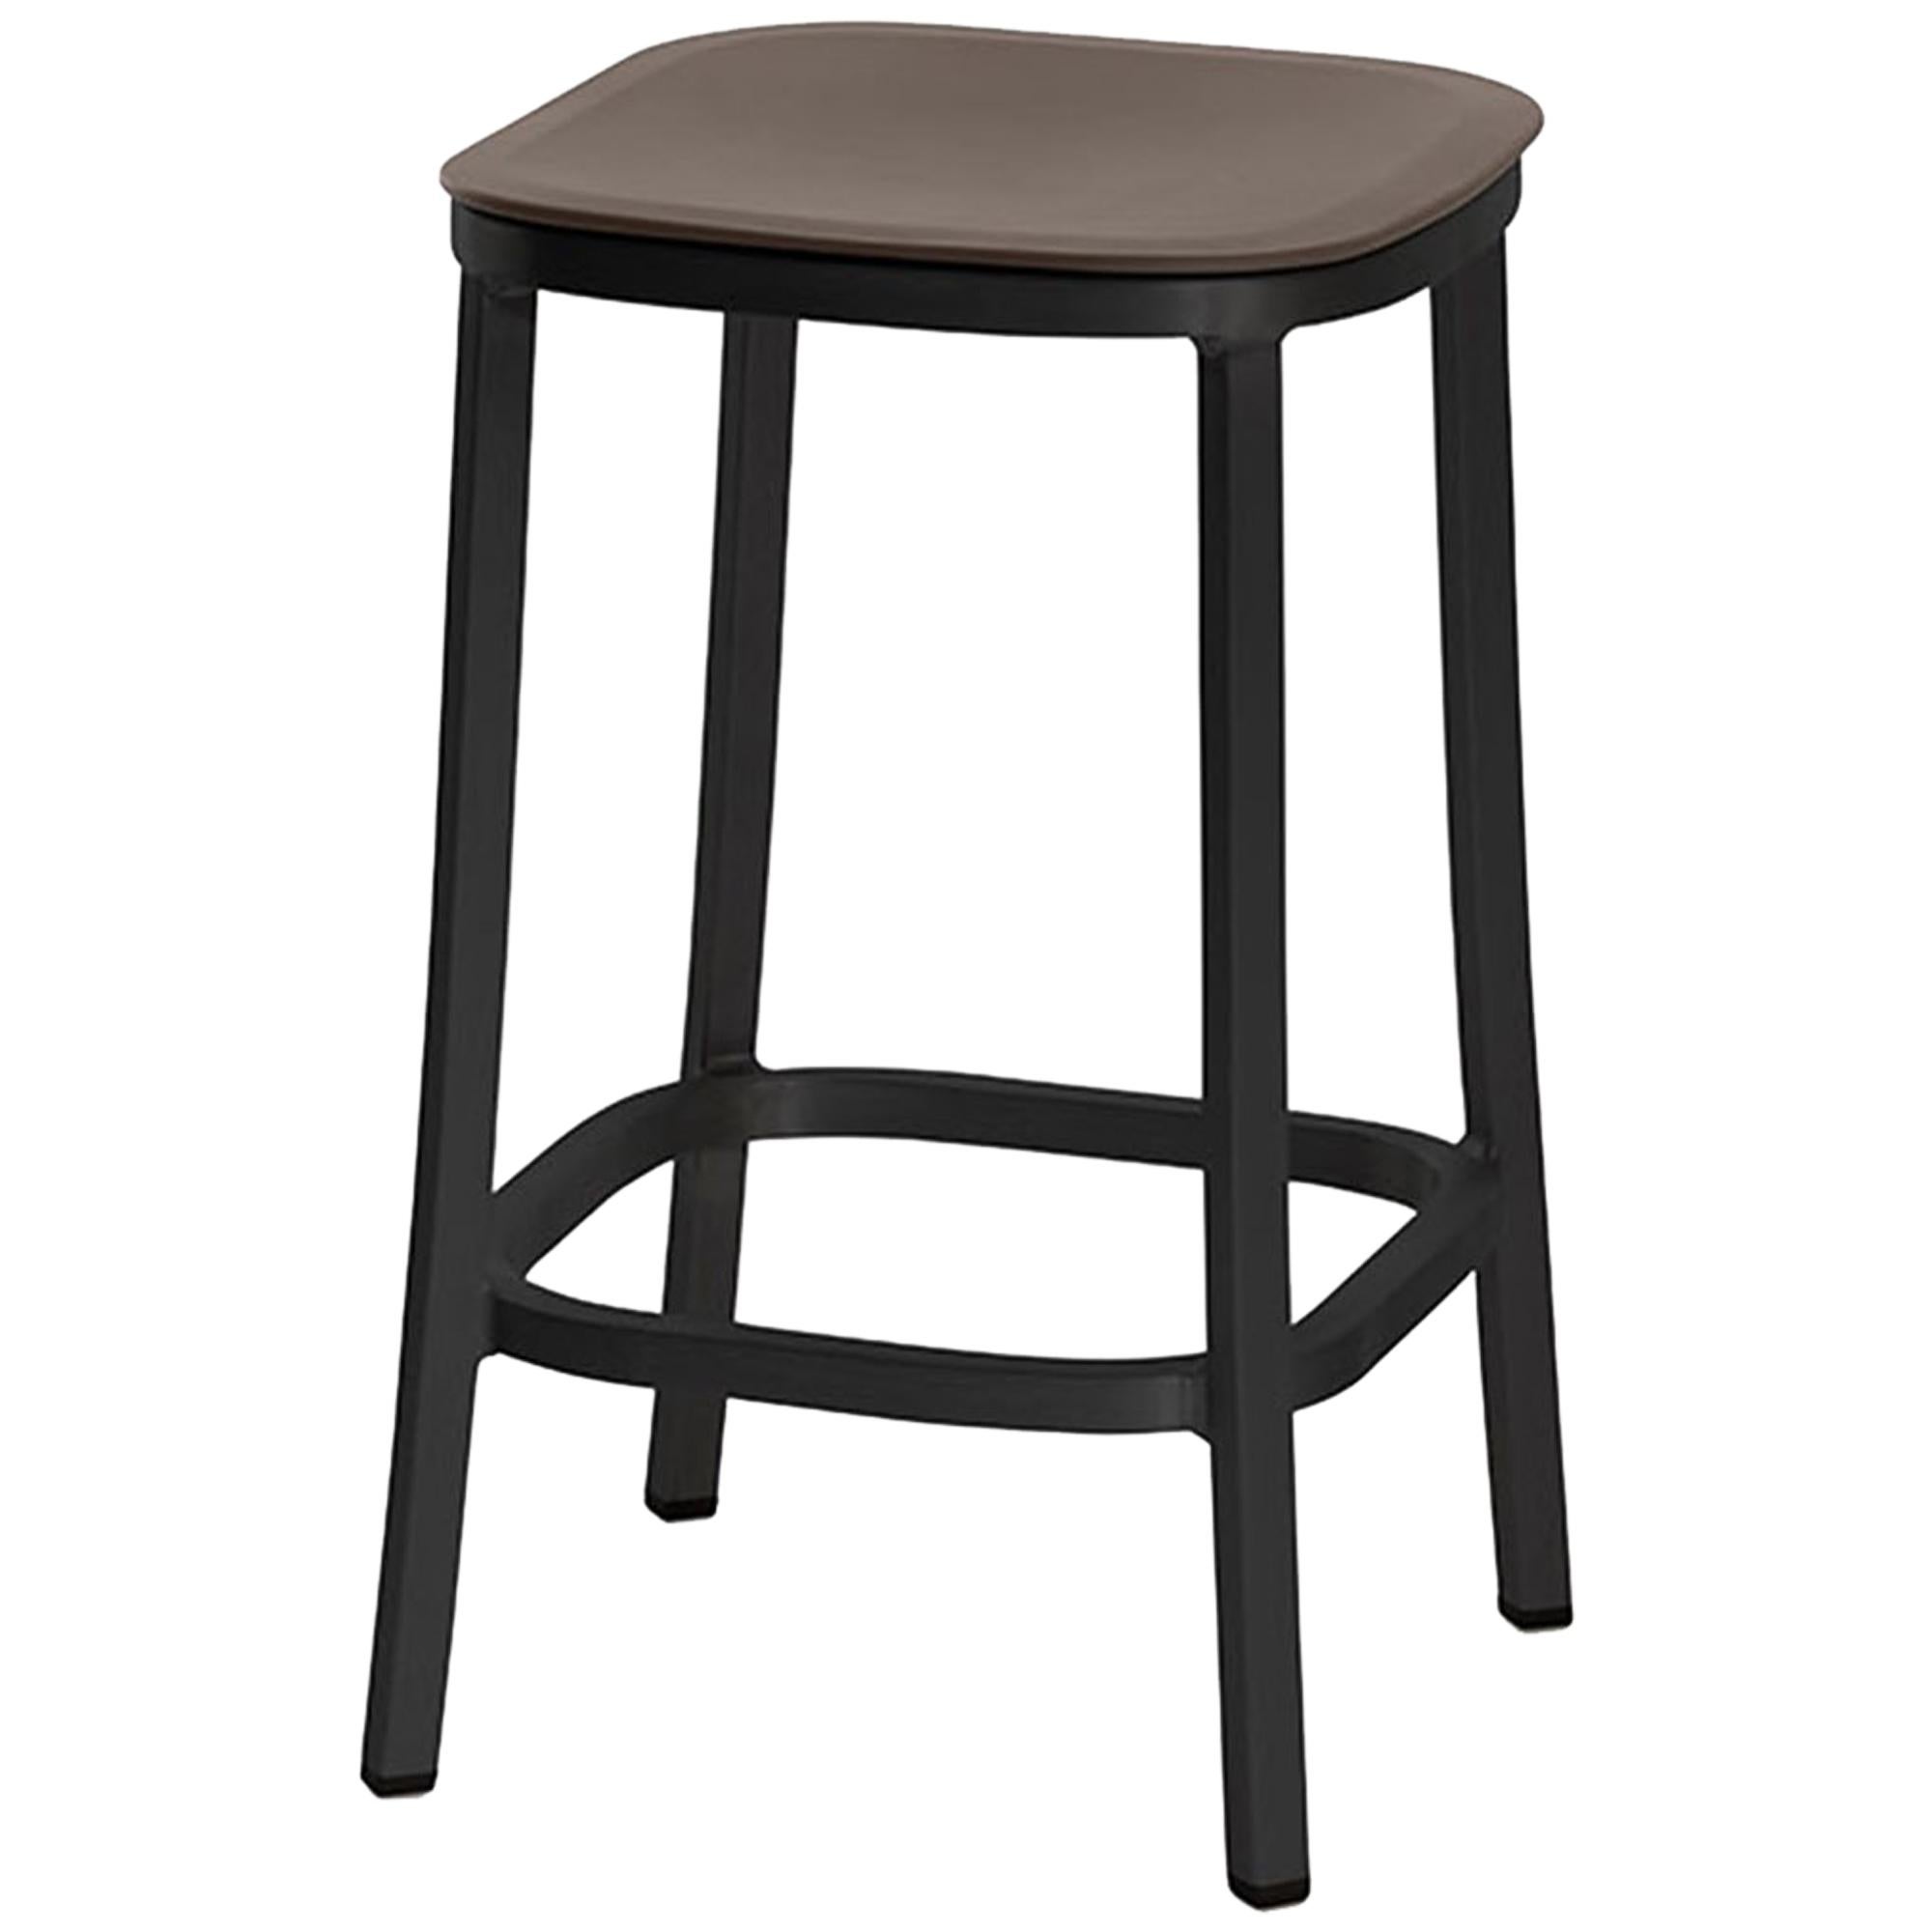 Emeco 1 Inch Counter Stool in Dark Aluminum and Brown by Jasper Morrison